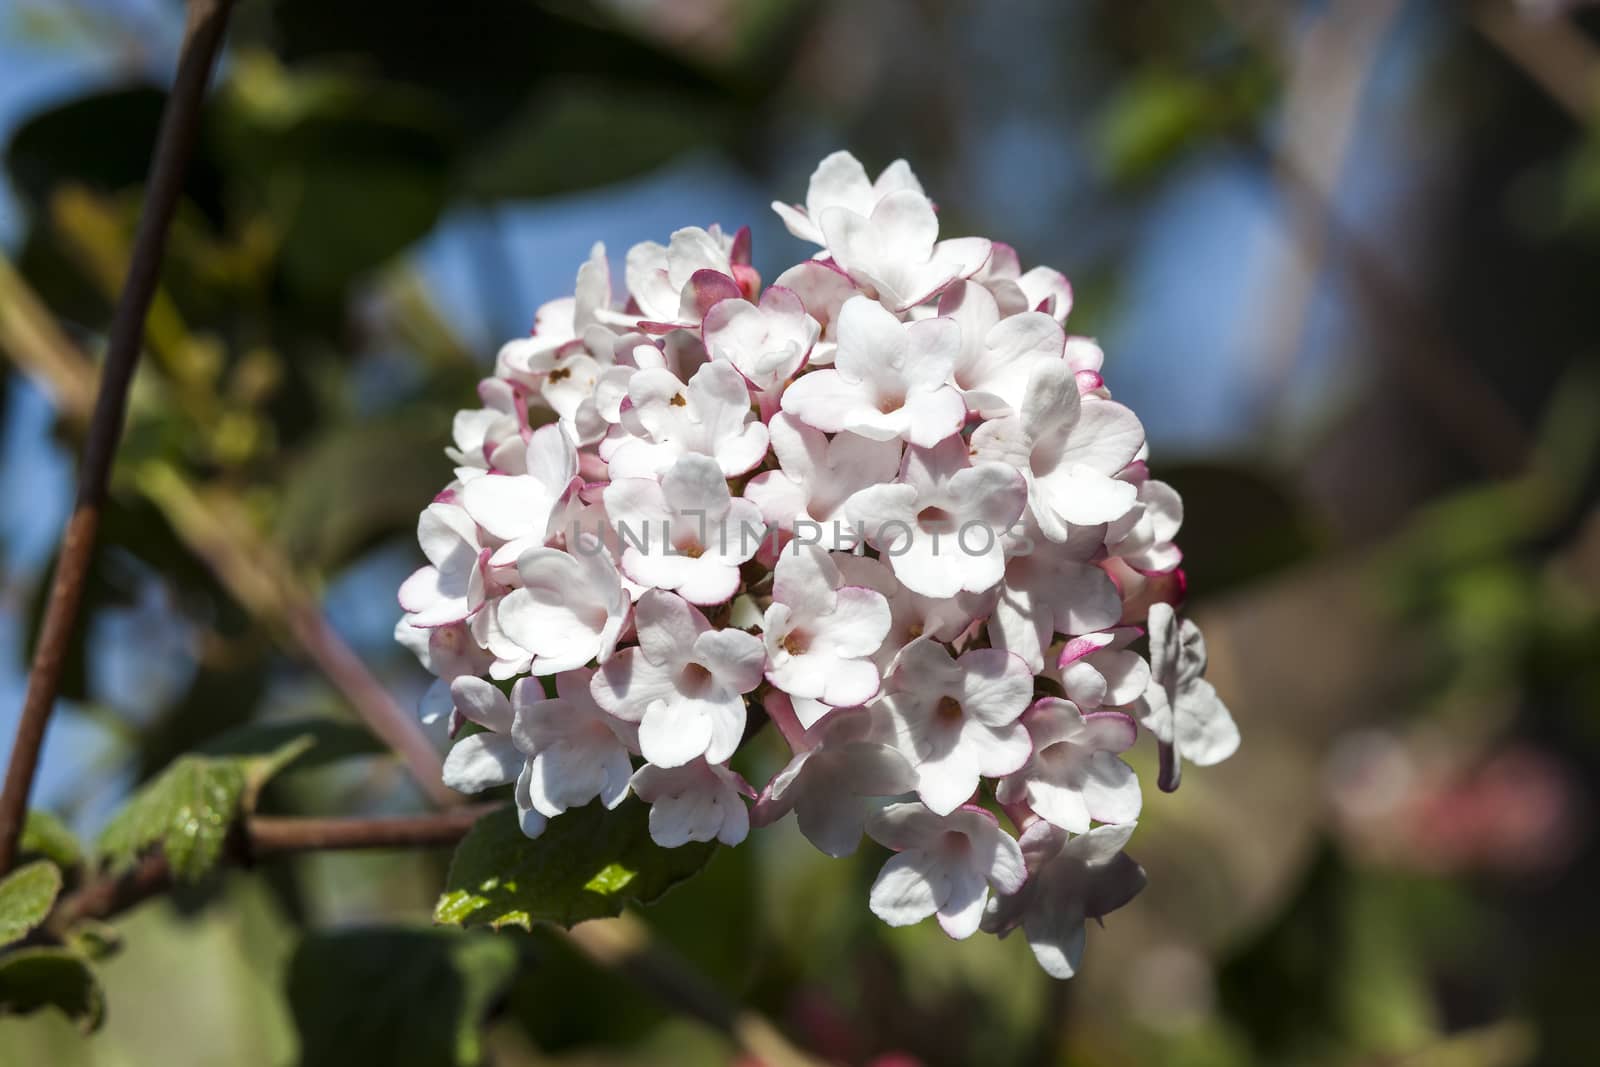 Viburnum carlessii 'Aurora'  a pink white winter flowering shrub which has highly fragrant flowers  in bloom